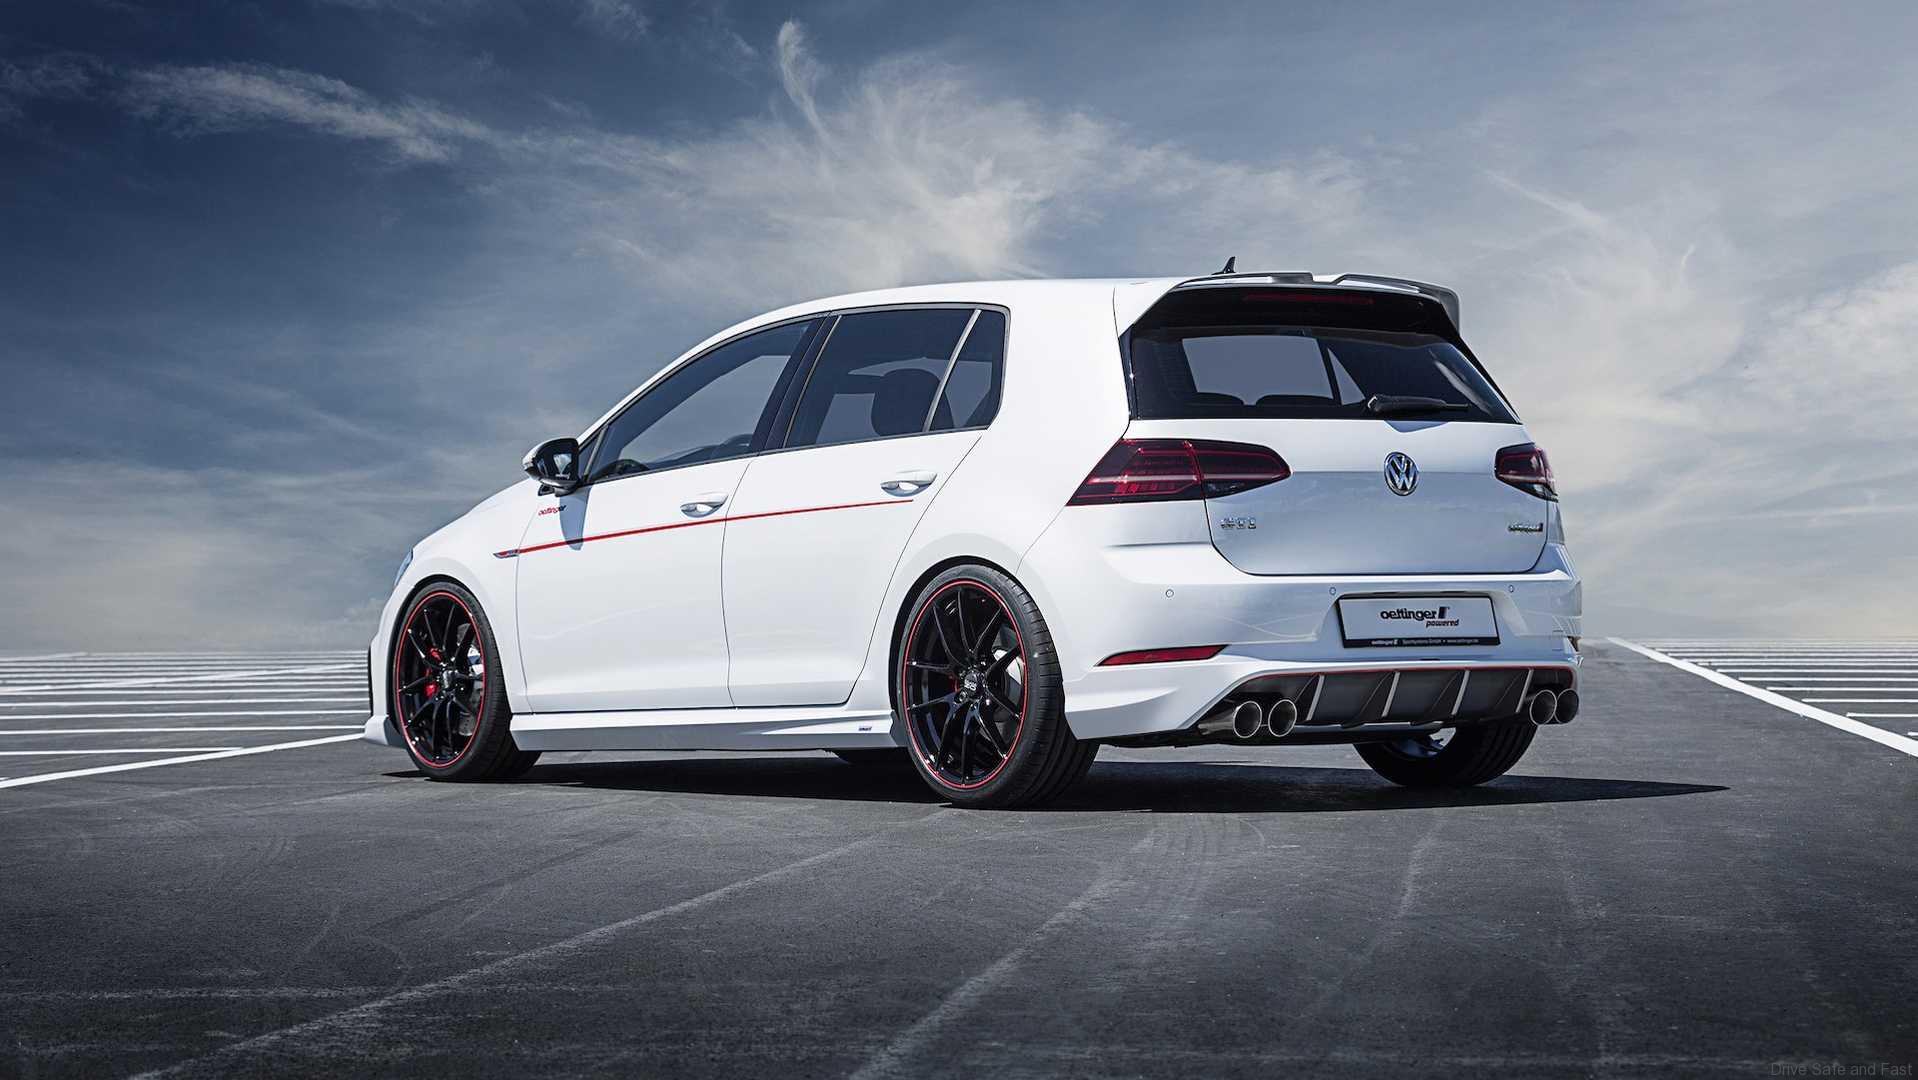 Here is a tuning idea for your Golf GTI